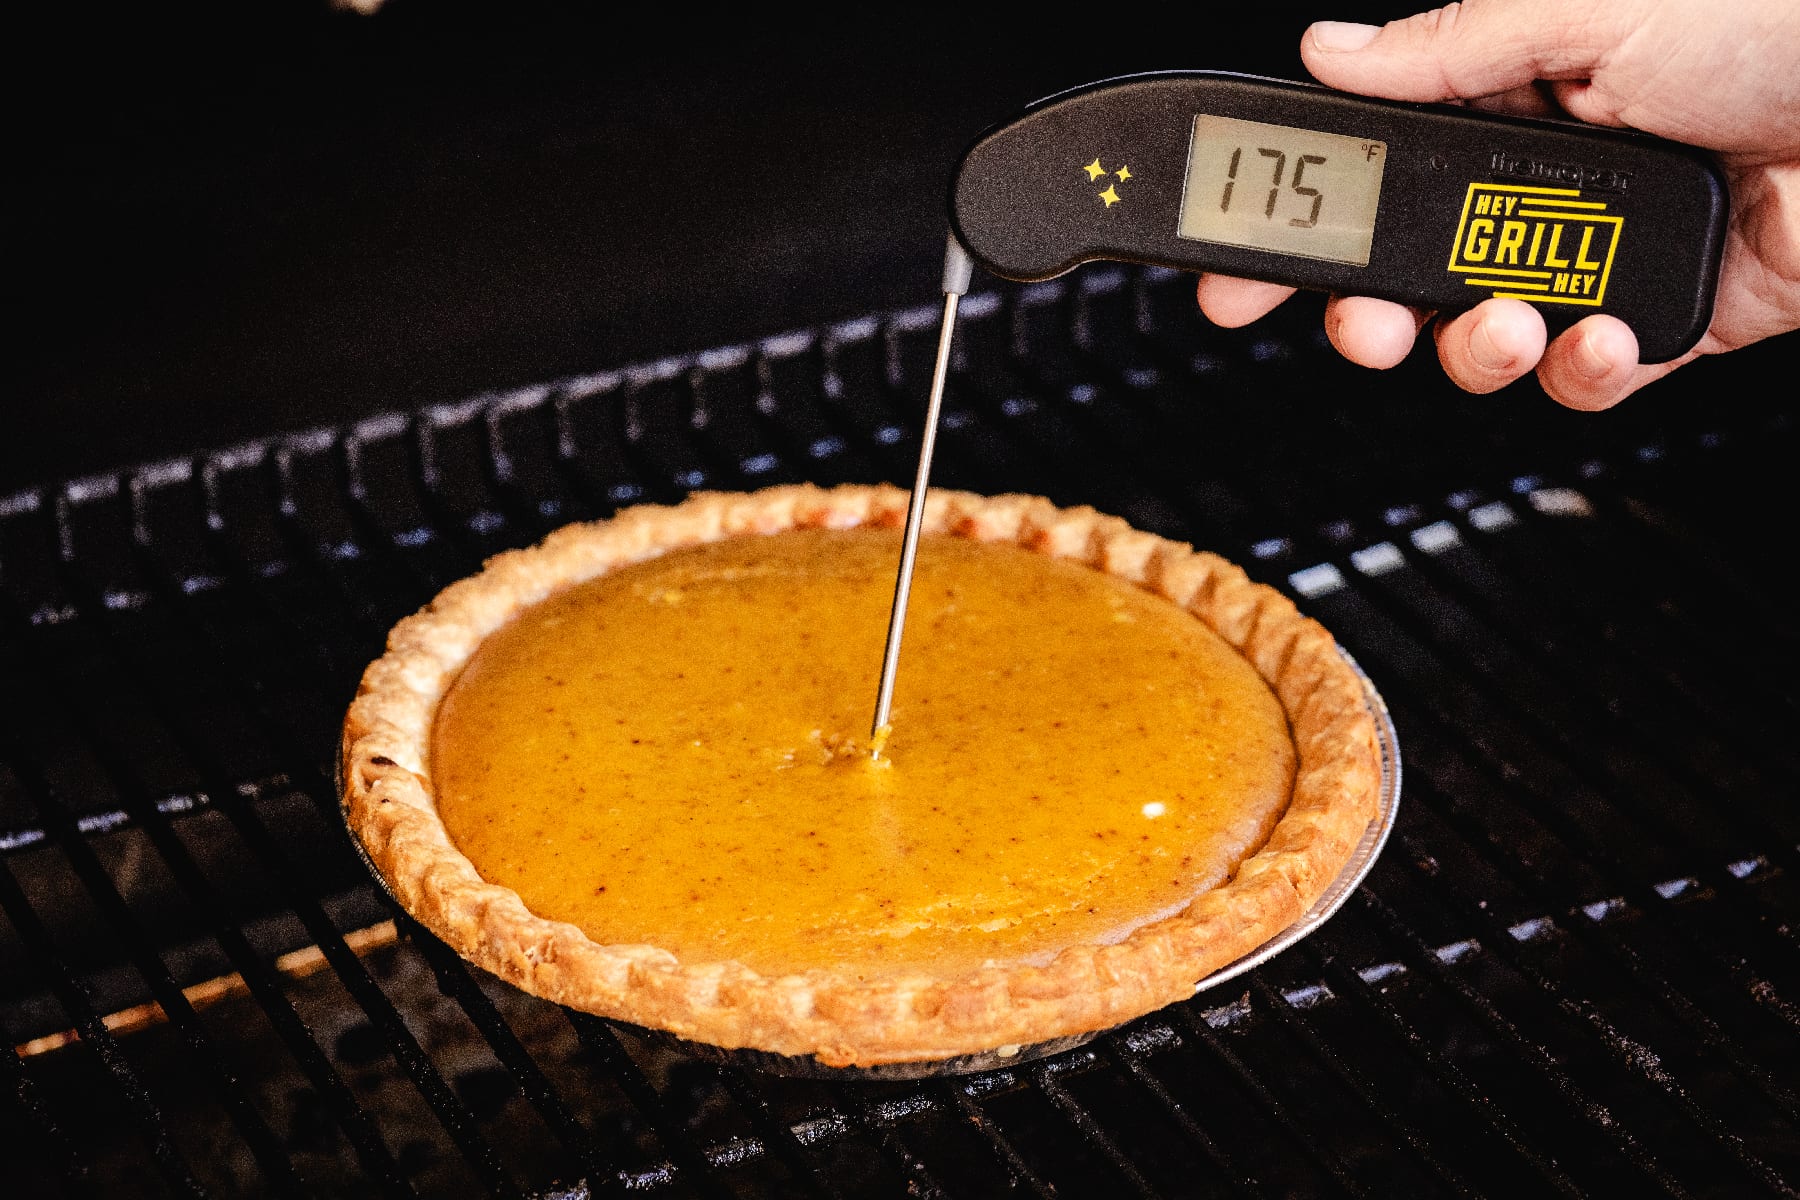 Thermometer taking internal temperature of pumpkin pie on grill reading 175 degrees F.